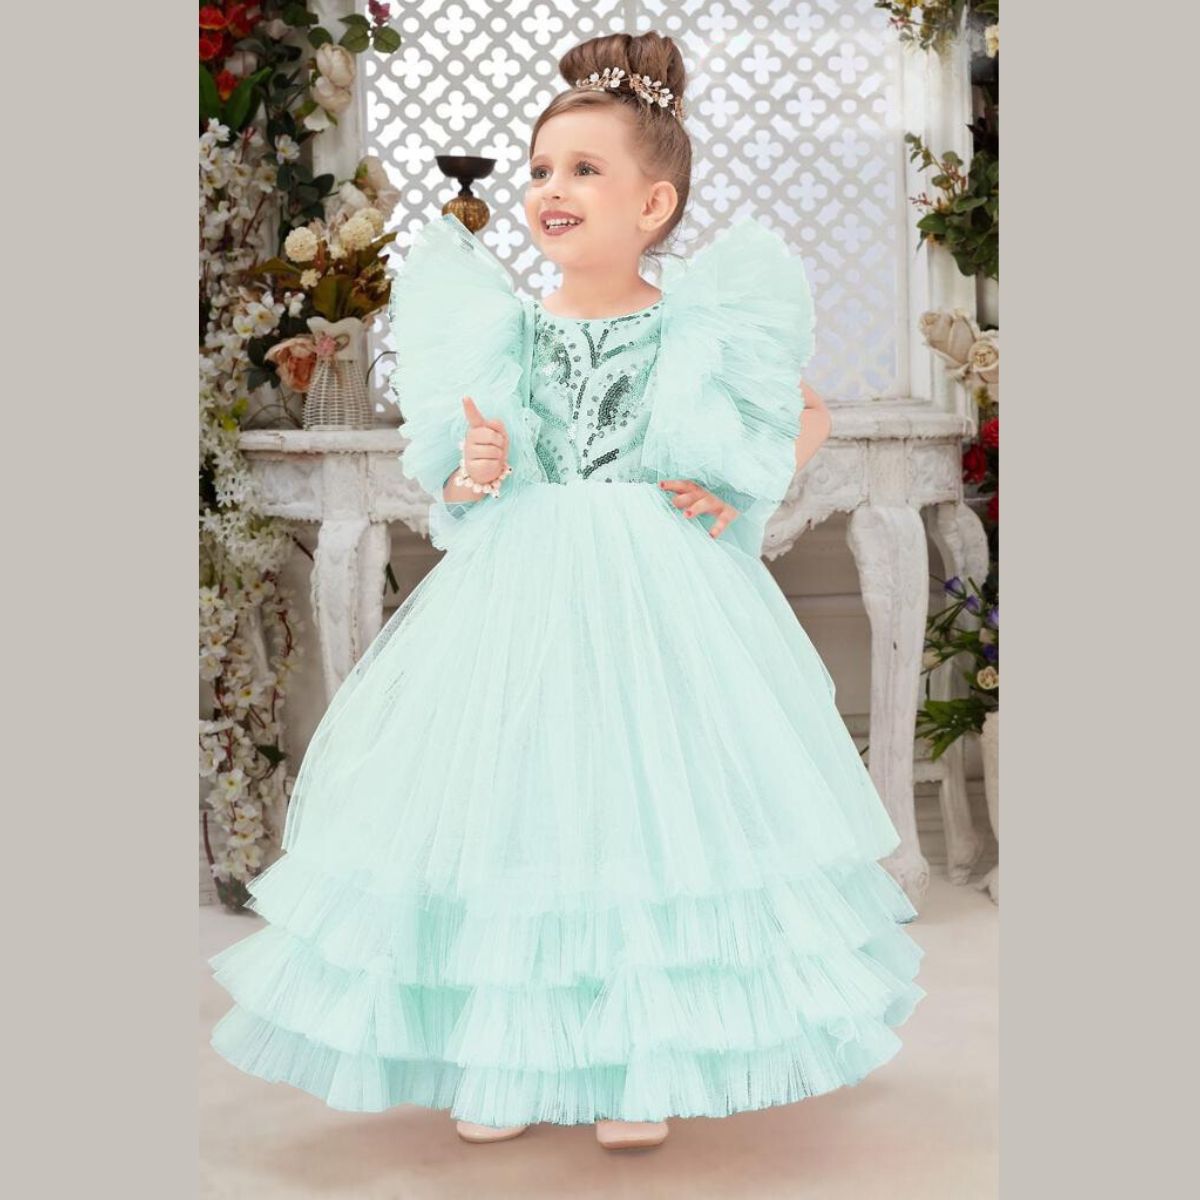 Girls Winter Holiday Dress | 3/4 Sleeve Lace Ruffle Formal Gown – Mia Belle  Girls